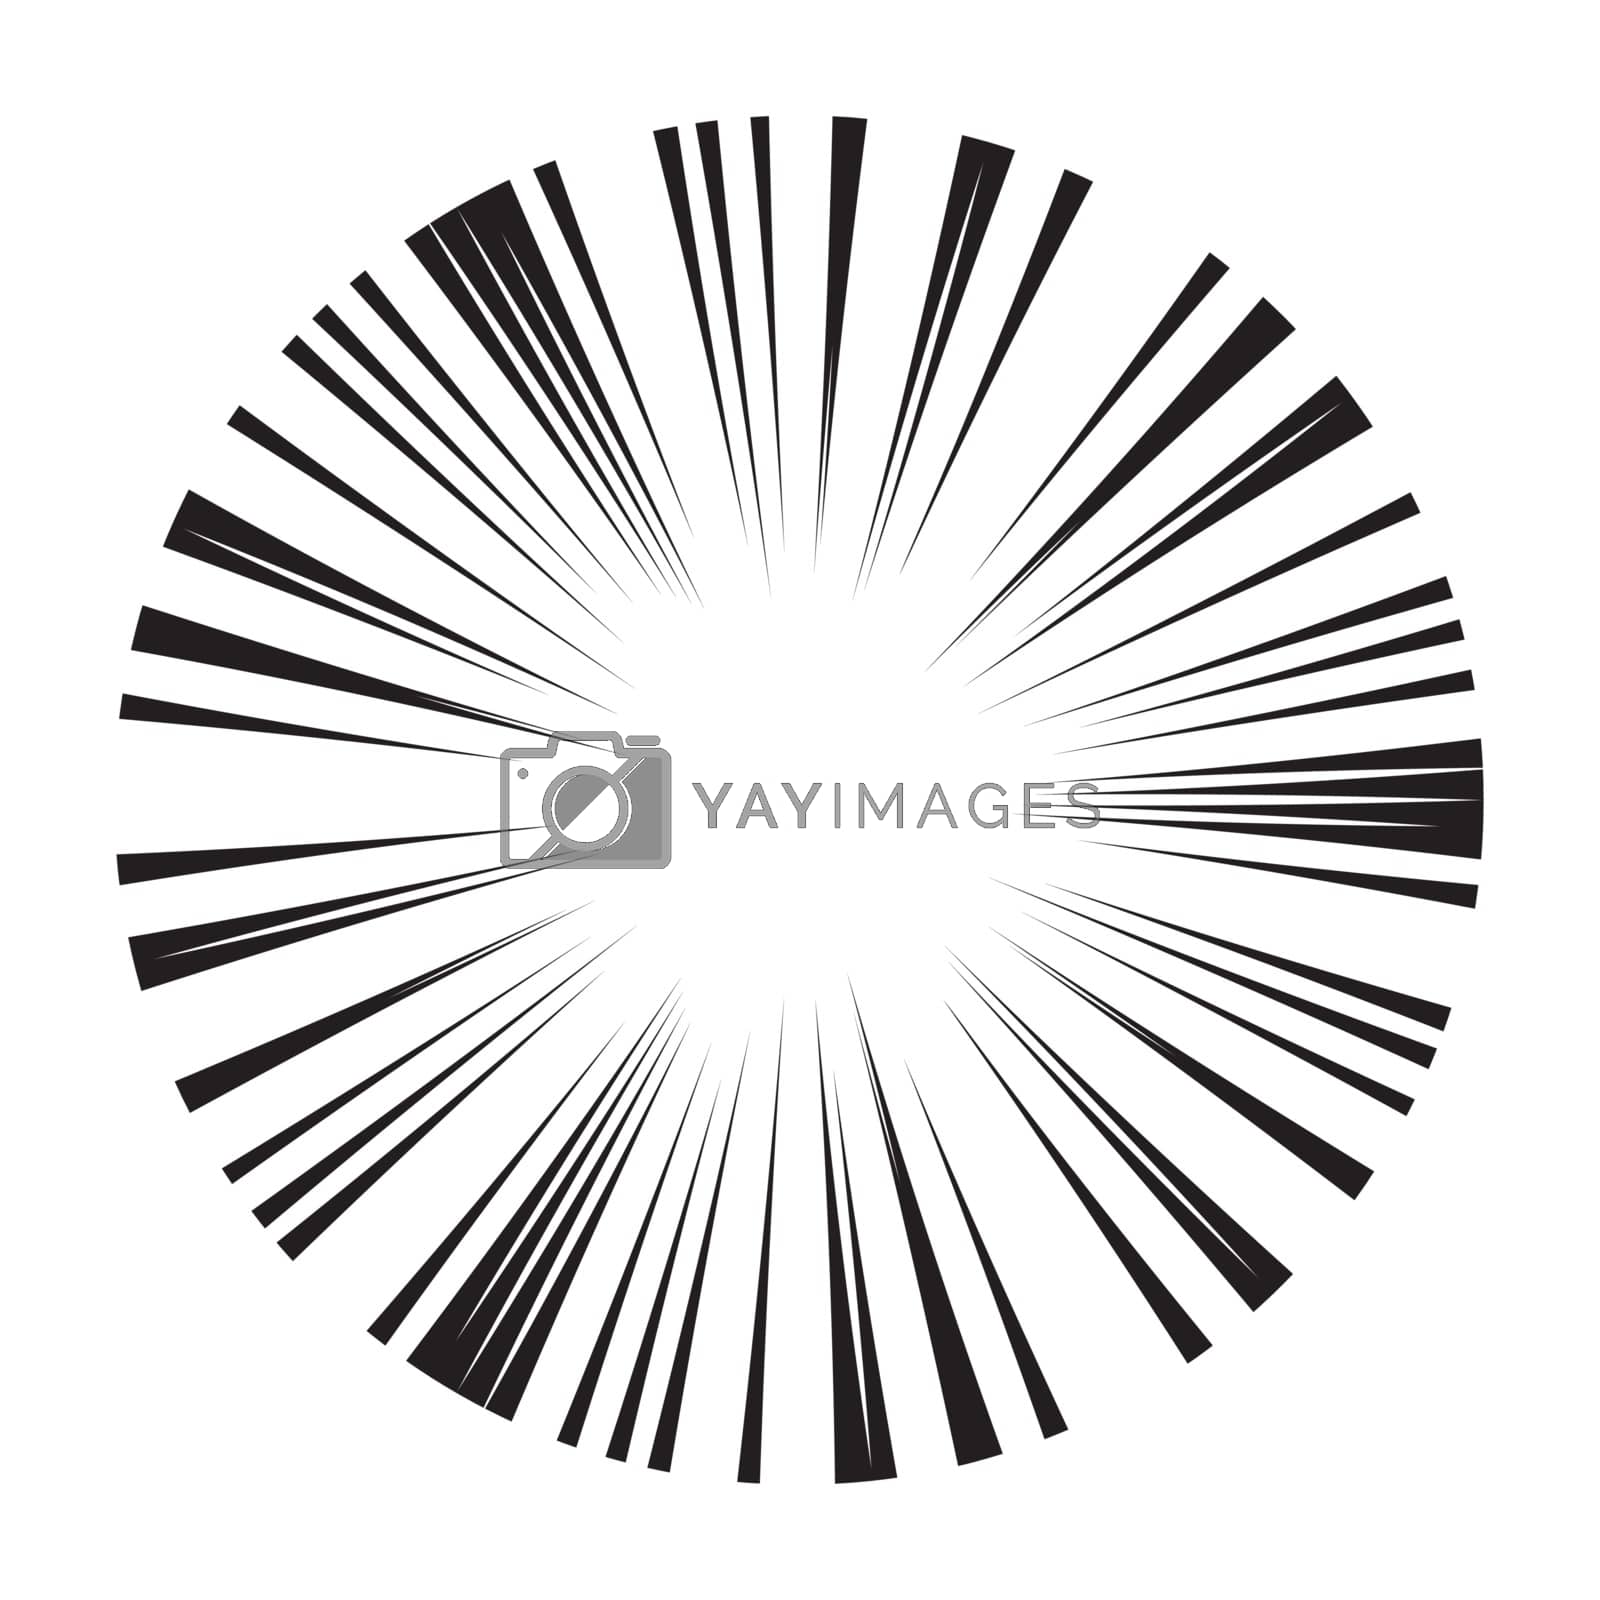 Royalty free image of comic radial speed lines vector background wallpaper by wektorygrafika